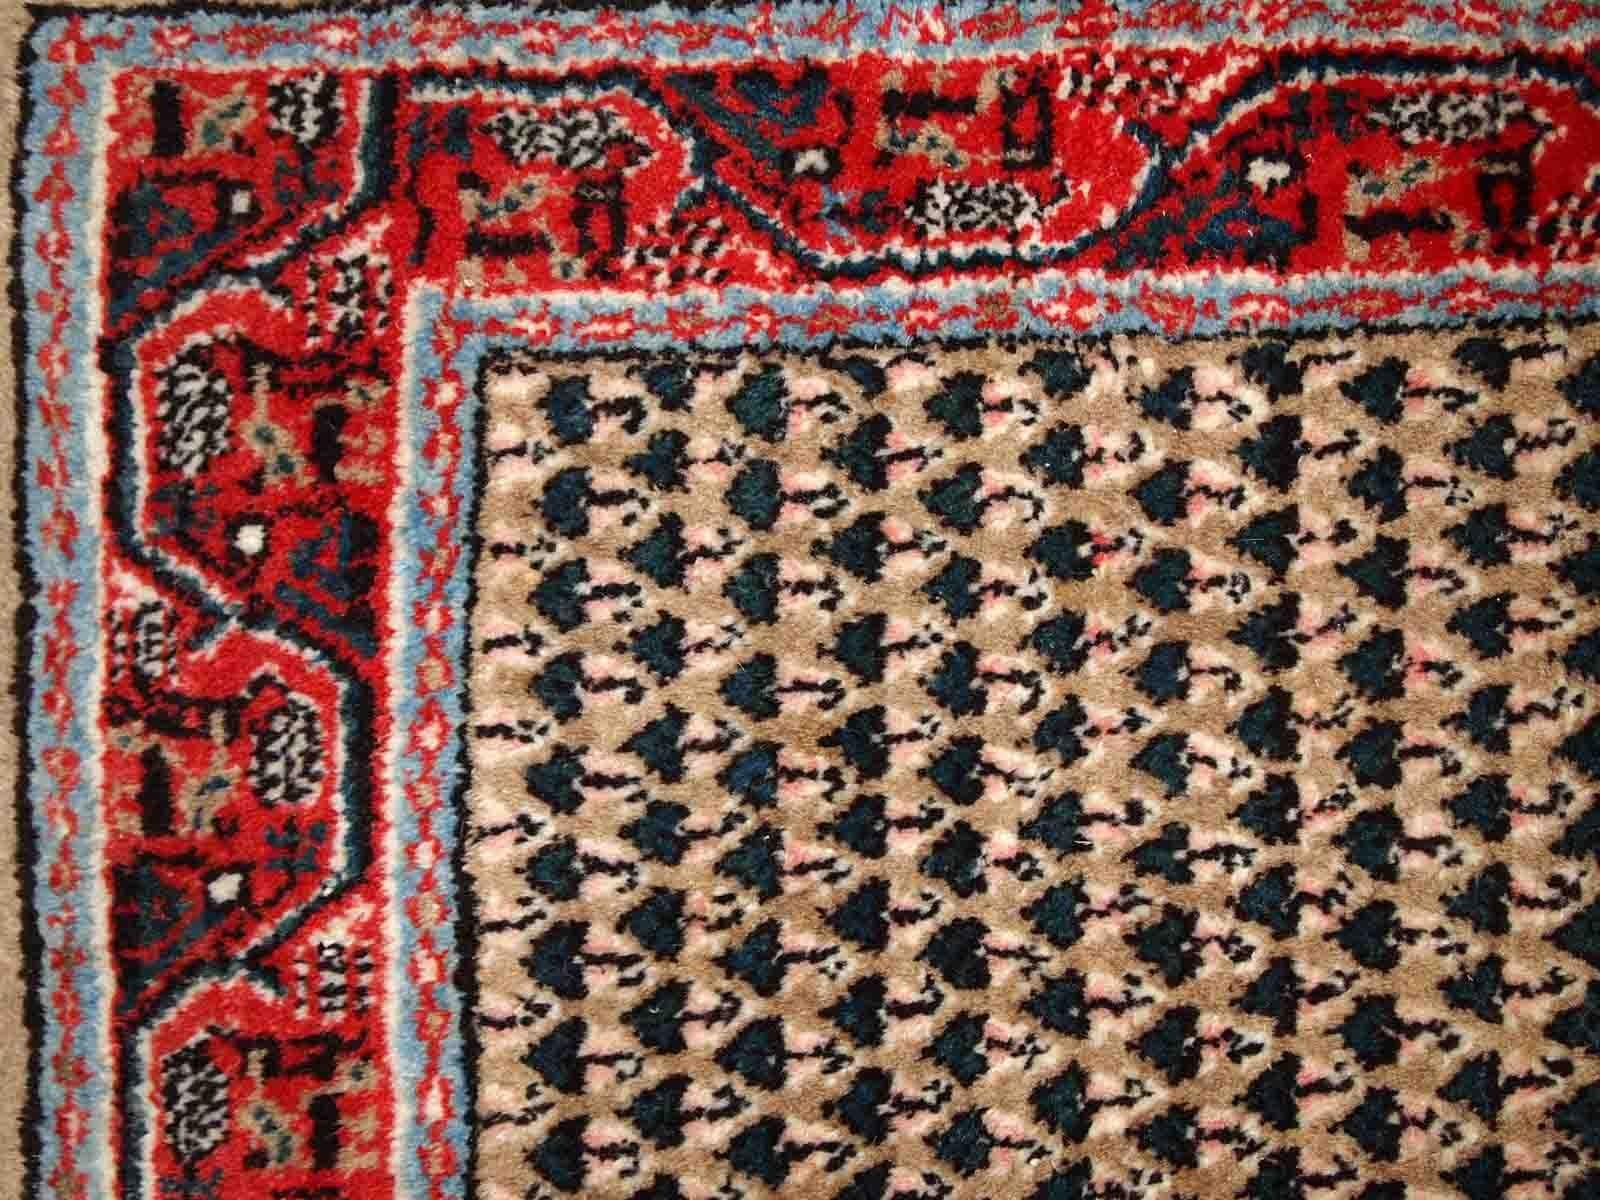 Handmade vintage Indian rug with Middle Eastern Seraband design. The rug is made in the end of 20th century, it is in original good condition.

-condition: origial good, 

-circa: 1970s,

-size: 2.1' x 4.1' (65cm x 125cm),
?
-material: